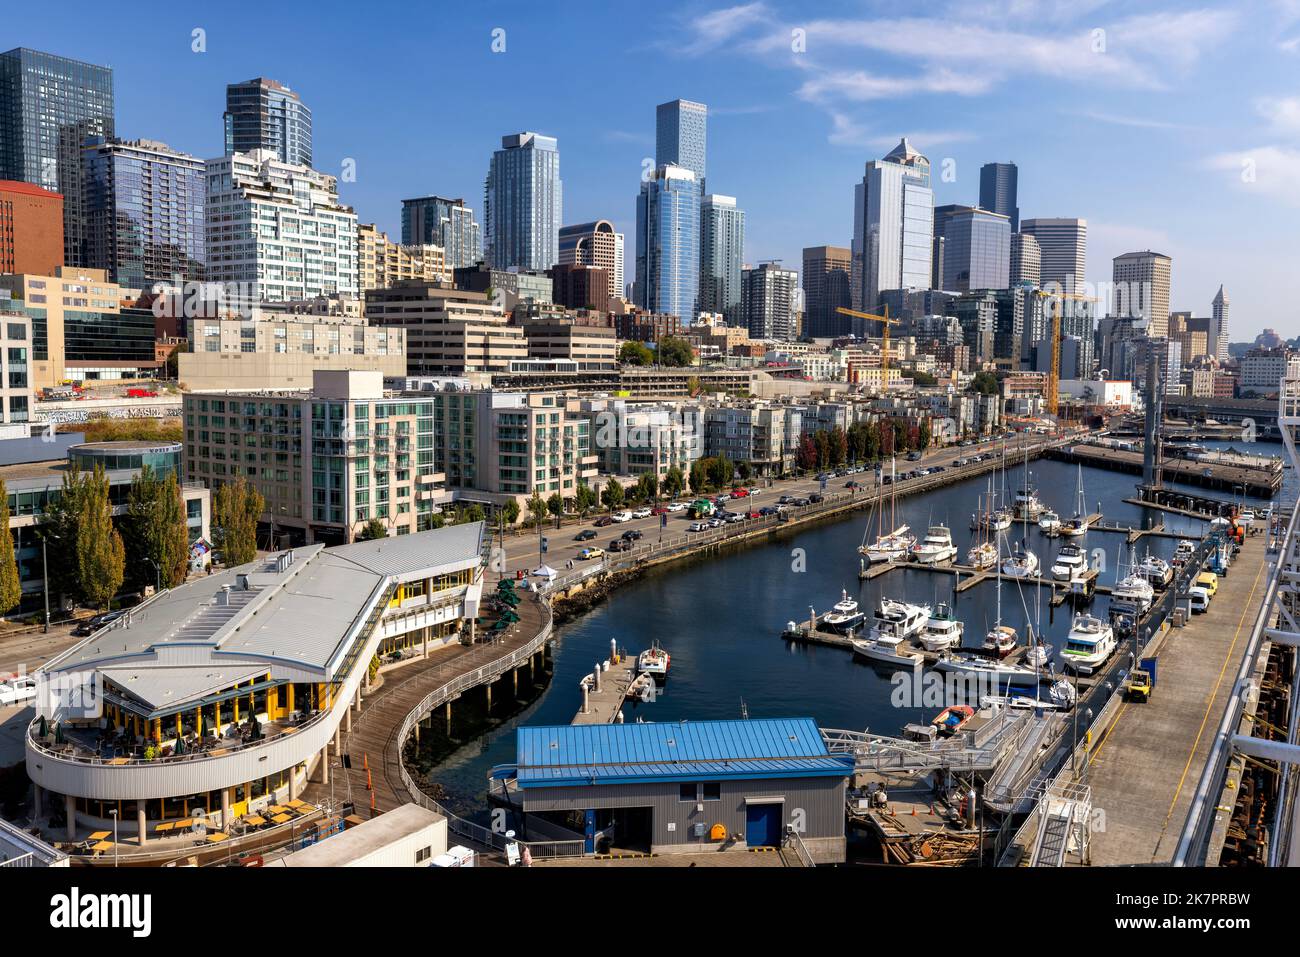 Downtown Seattle Skyline viewed from the Pier 66 waterfront - Seattle, Washington, USA Stock Photo